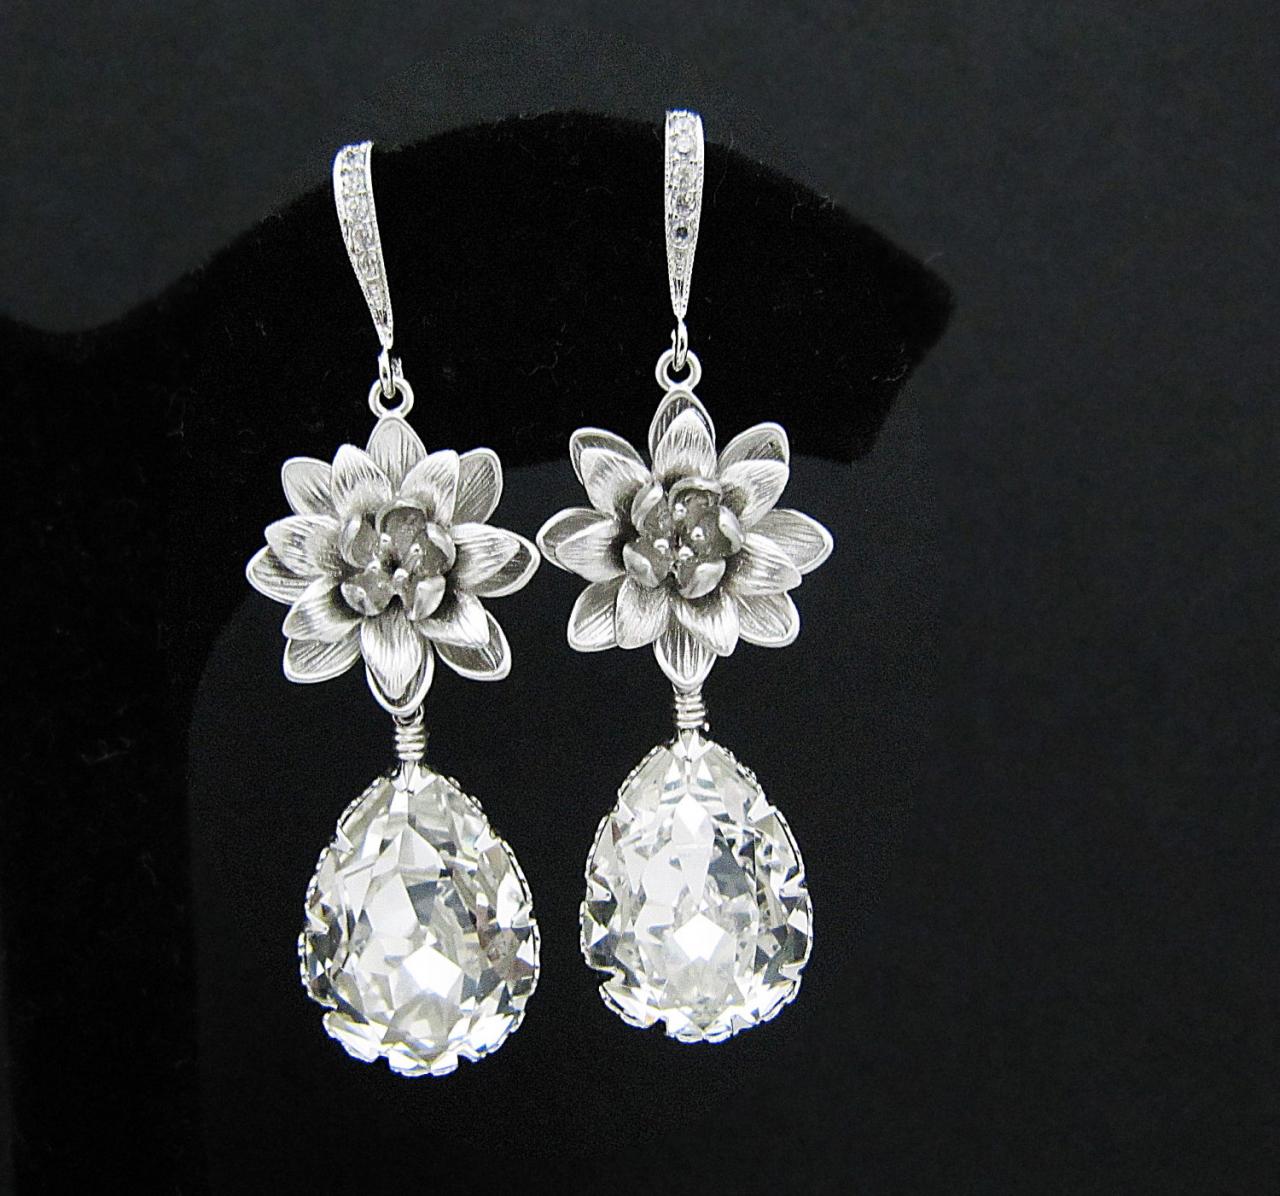 Bridal Earrings Bridesmaid Earrings Matte rodium flower with and Clear White Swarovski Crystal Tear drops